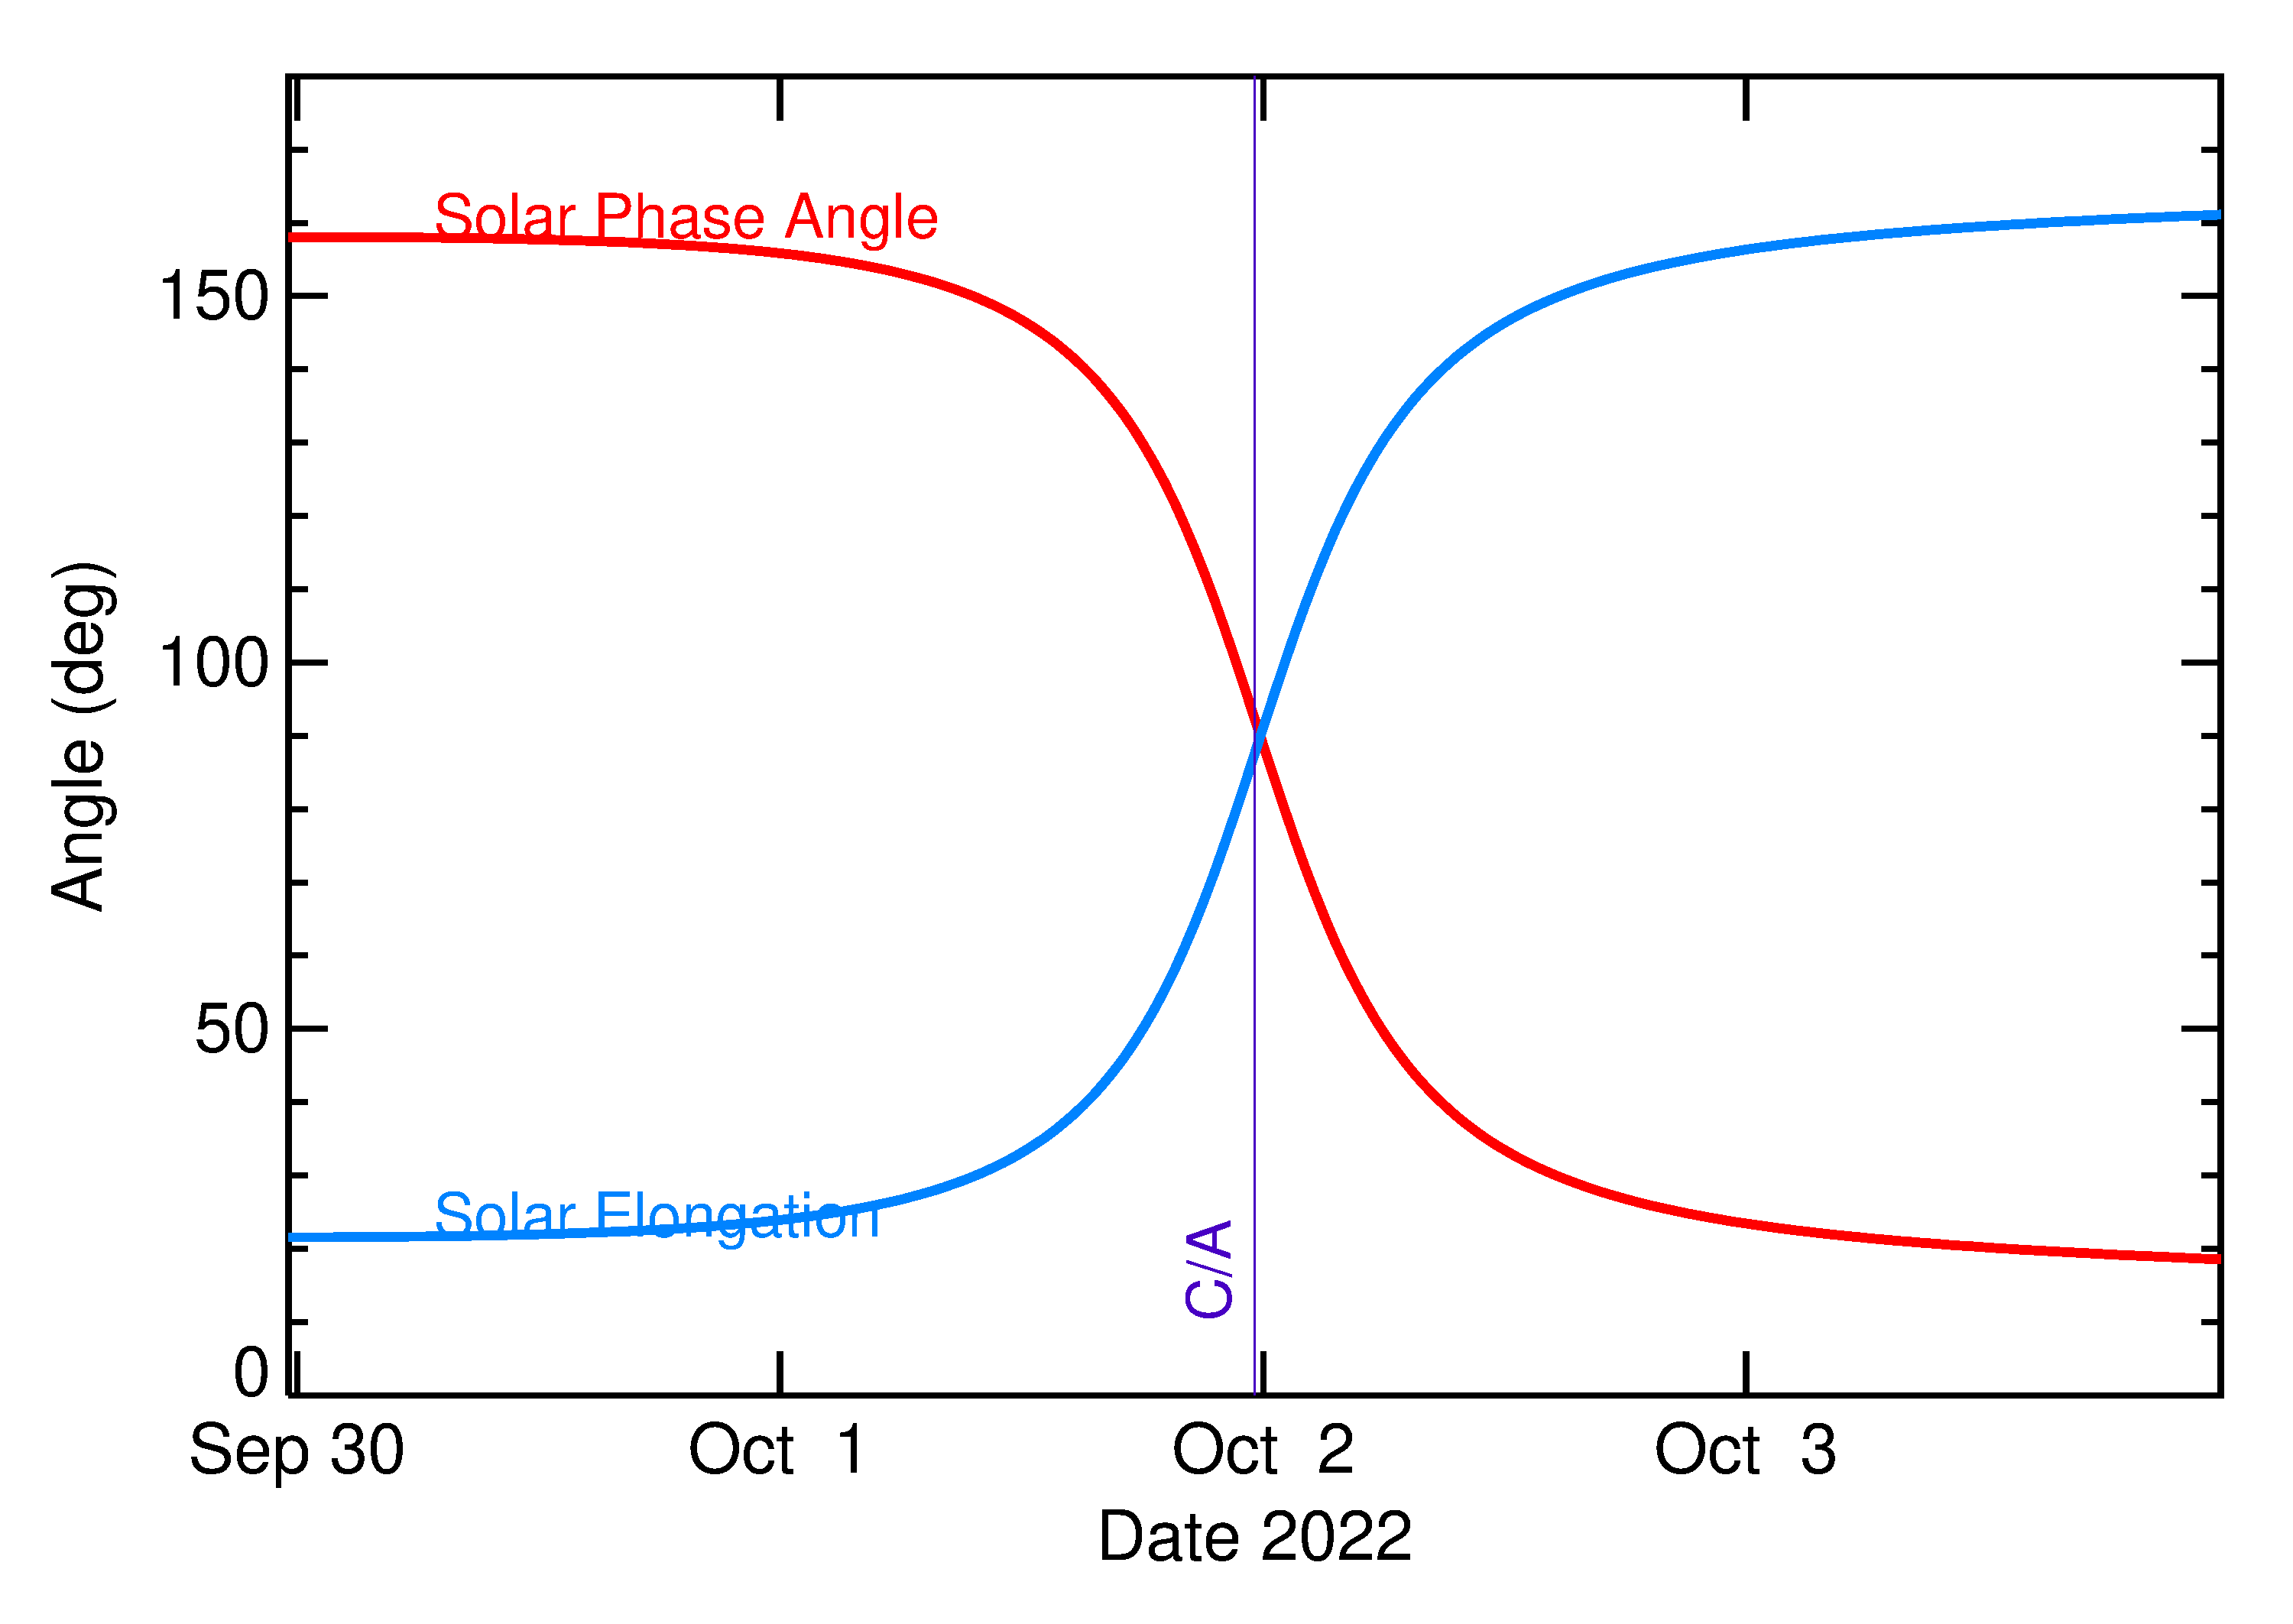 Solar Elongation and Solar Phase Angle of 2022 TL in the days around closest approach